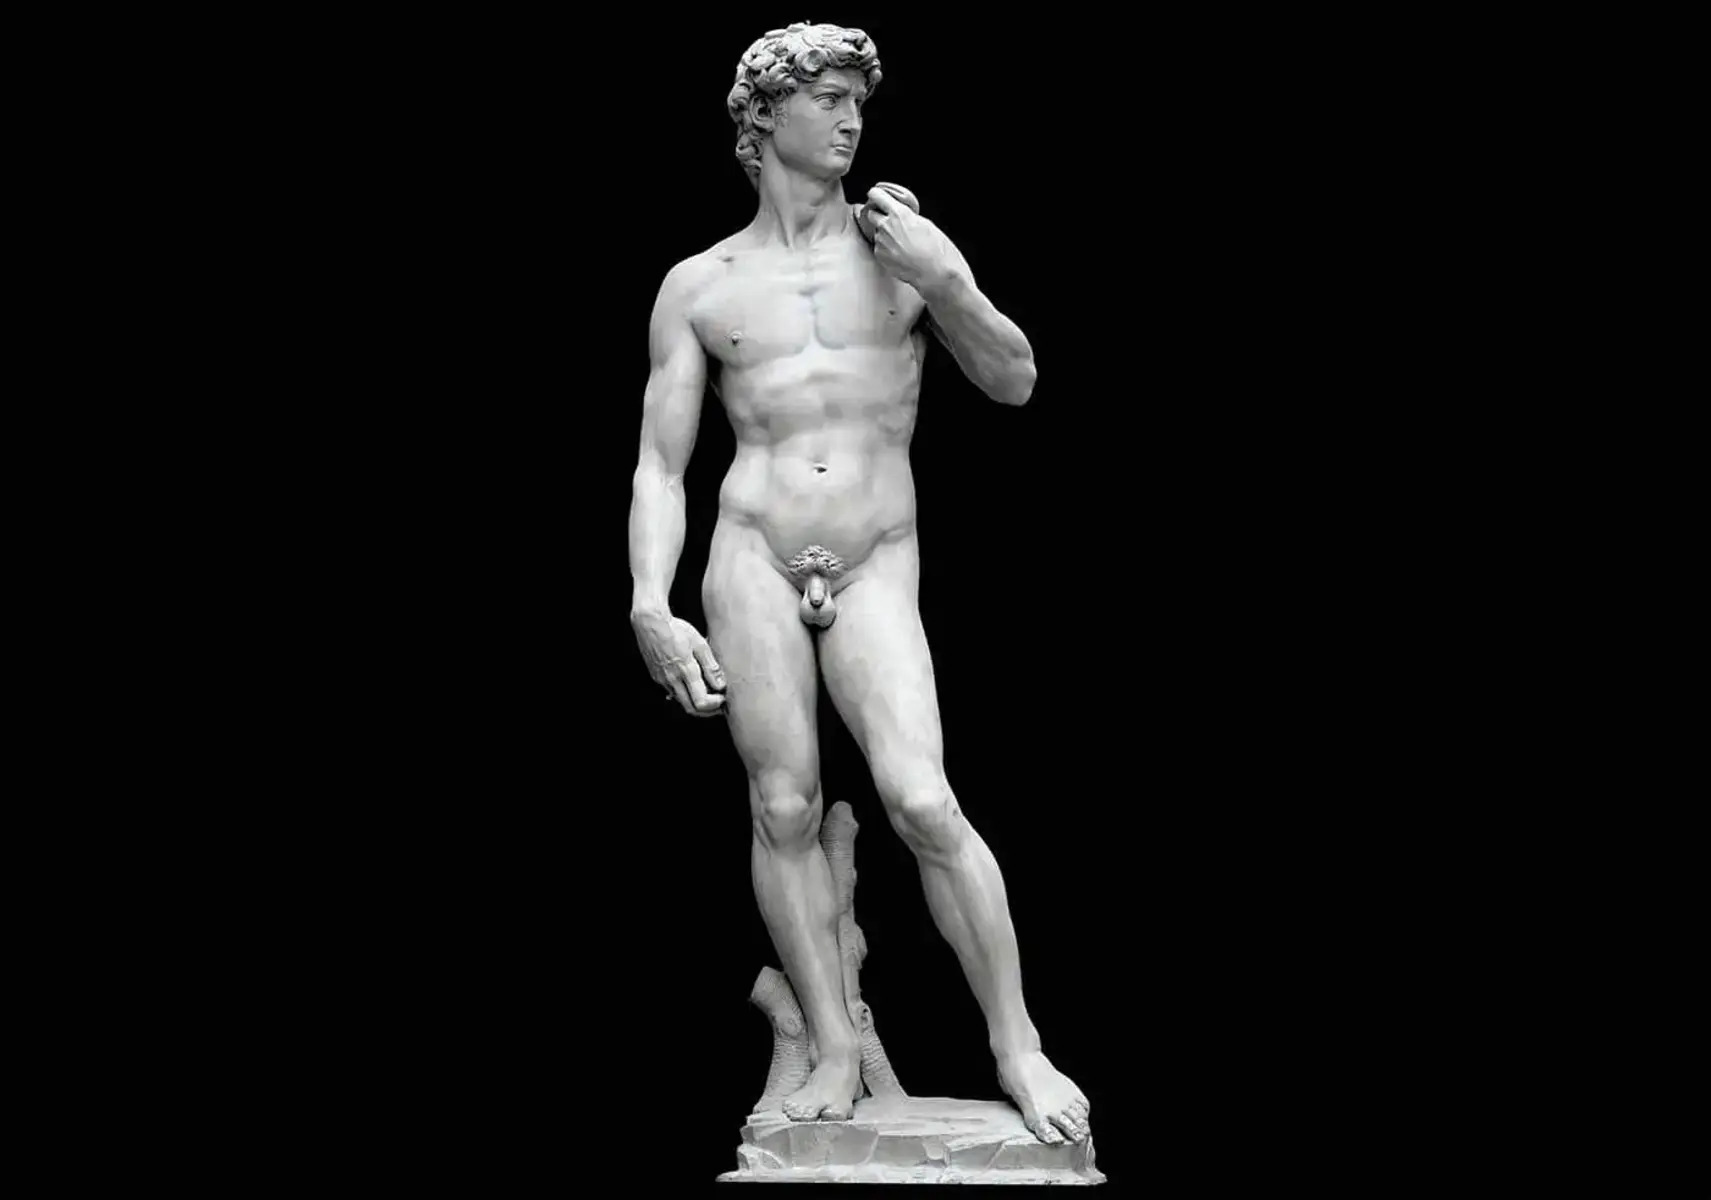 Which Statue Is The Earliest Known Example Of The Use Of Contrapposto In Sculpture?